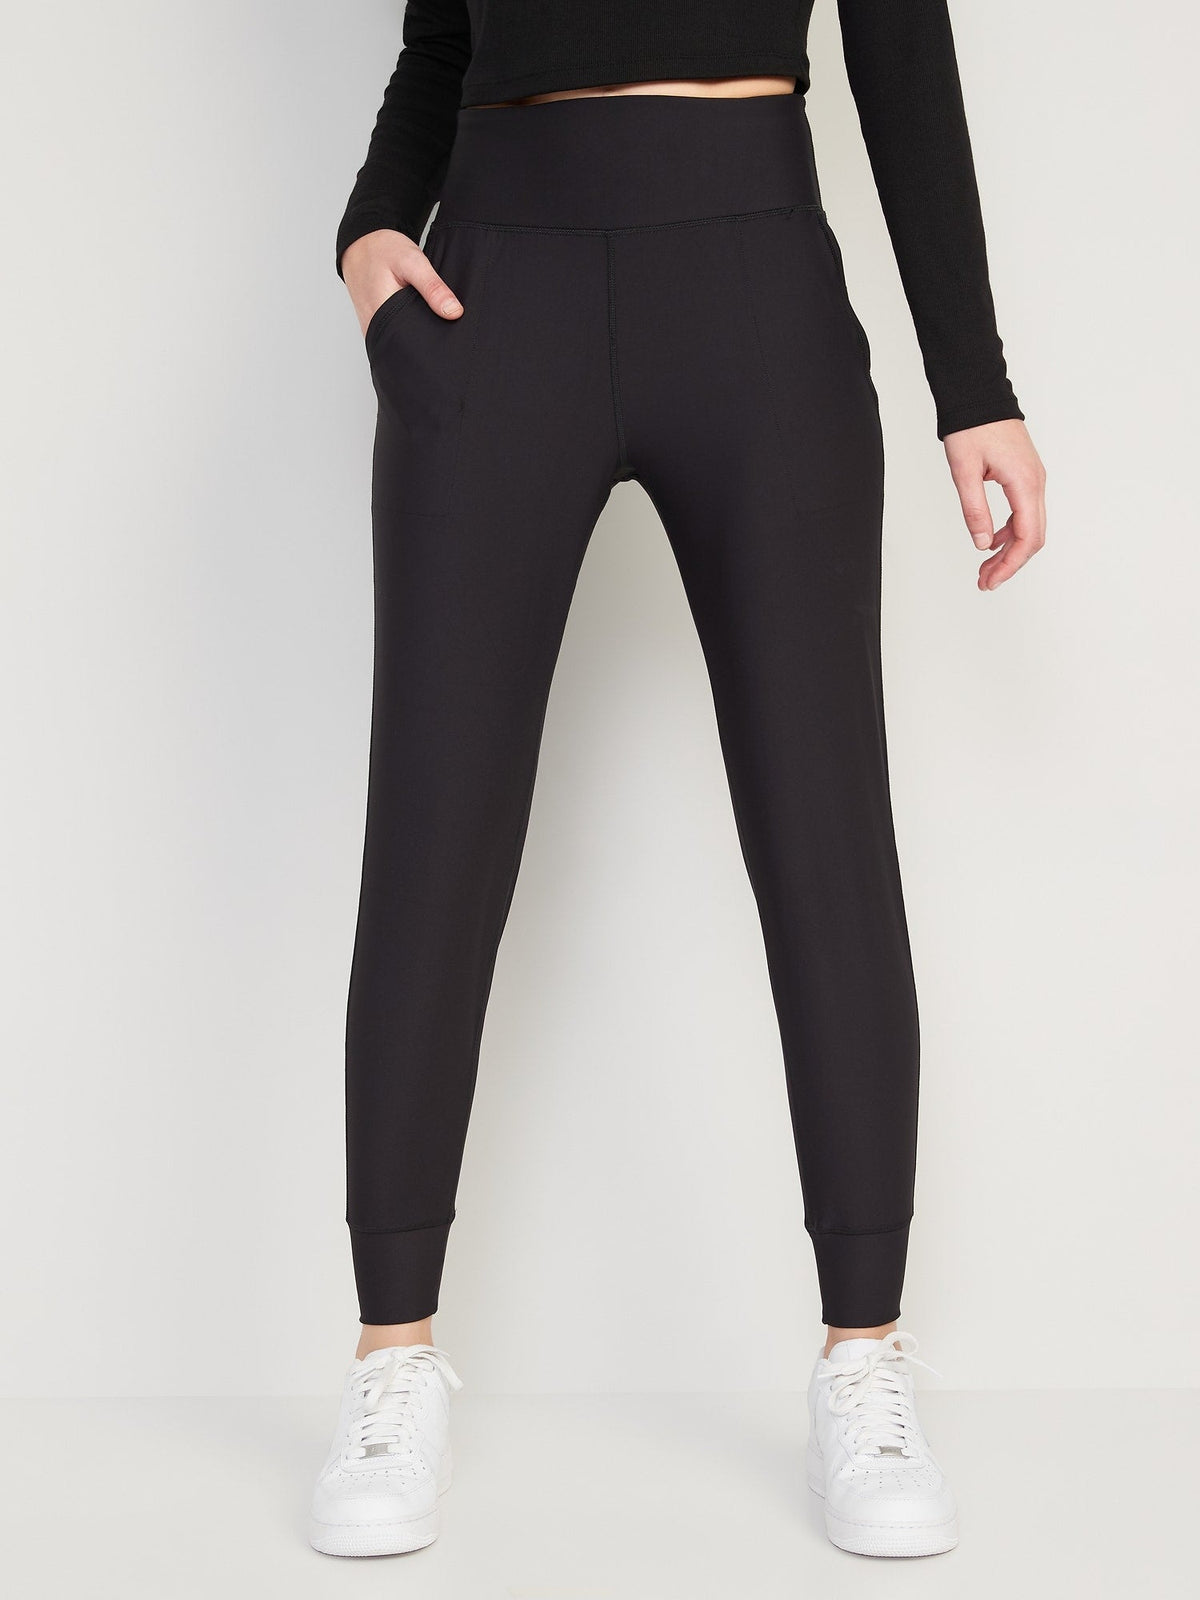 High-Waisted PowerSoft Leggings for Women - Old Navy Philippines